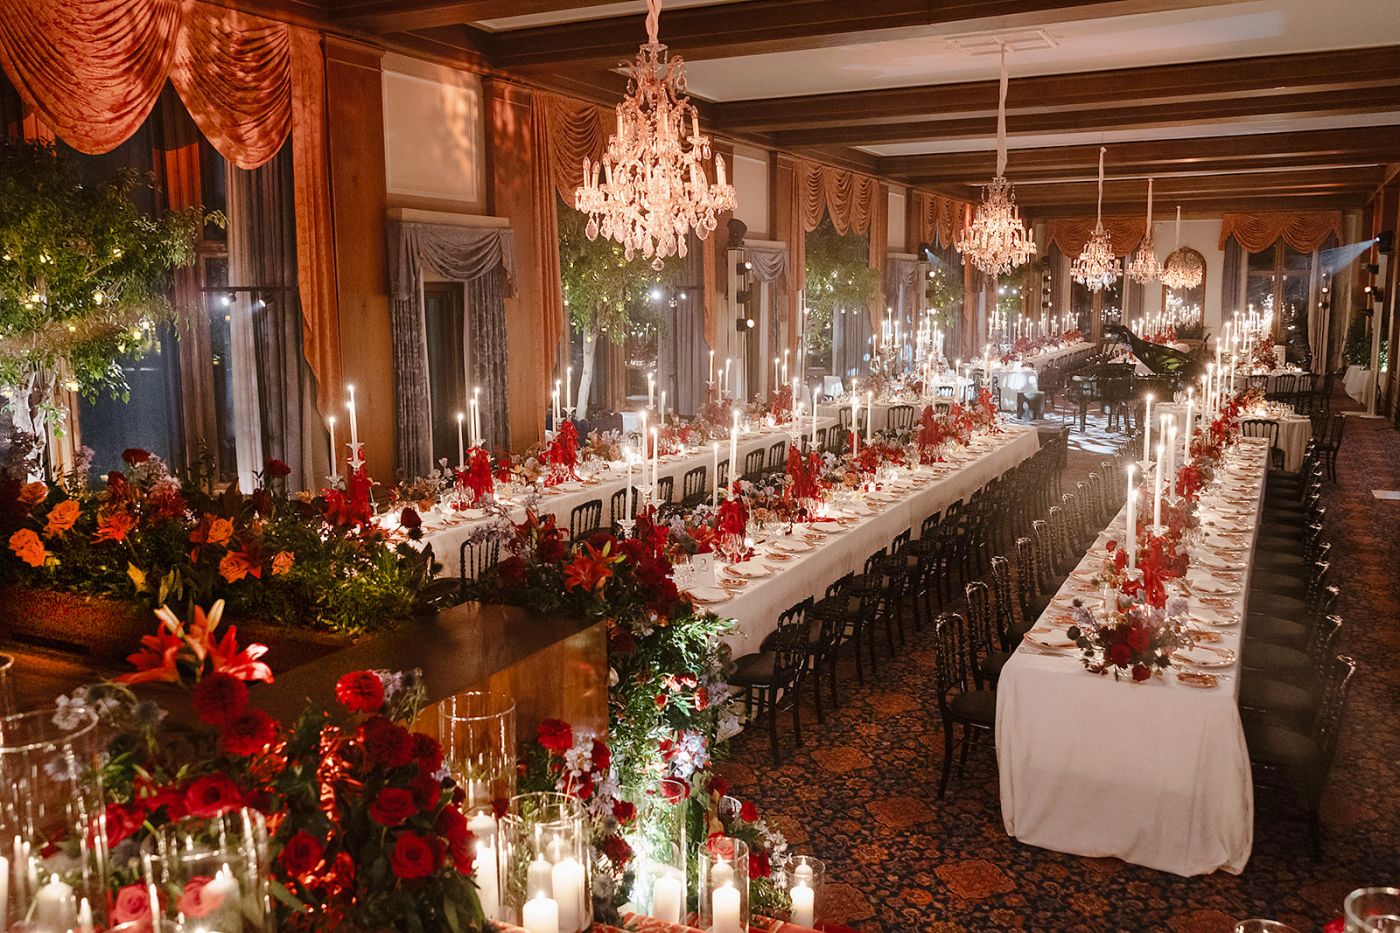 Dinner tables of the old word winter wedding in Saint Moritz